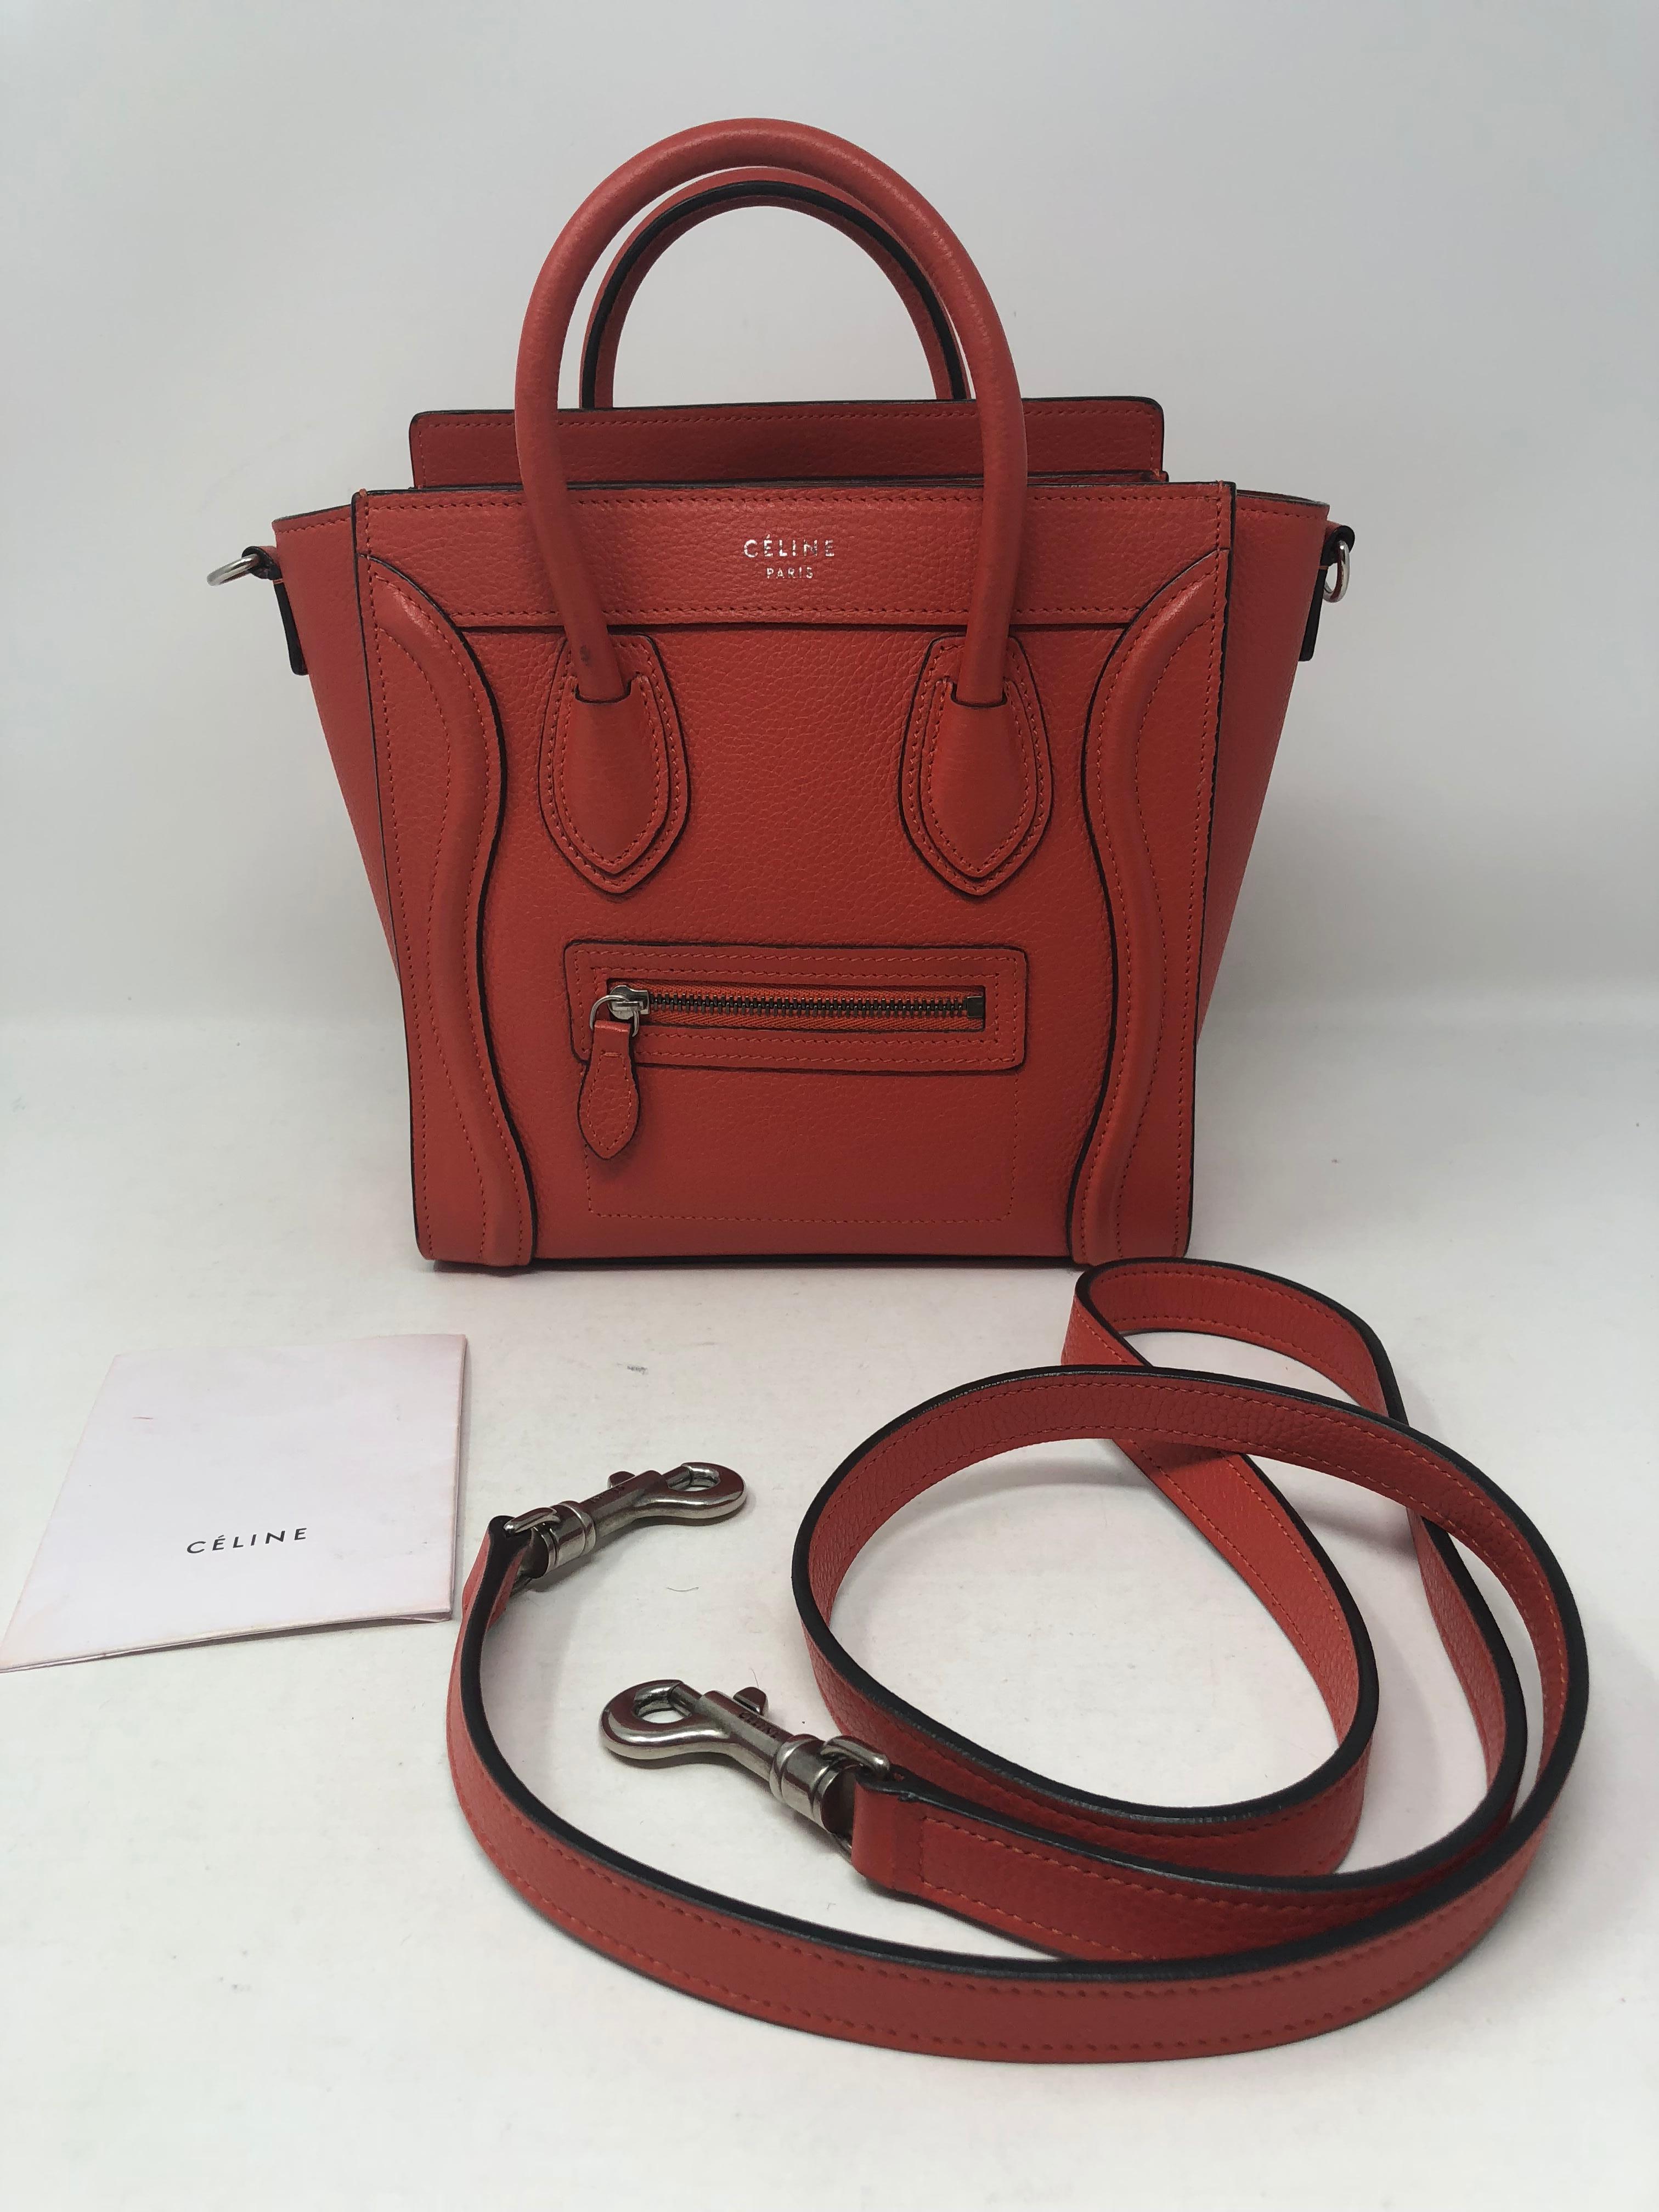 Celine Nano Orange Red color Crossbody. Mini size Celine bag with detachable strap. Drummed leather in good condition. Most wanted style by Celine. Silver hardware. Clean interior. Guaranteed authentic. 